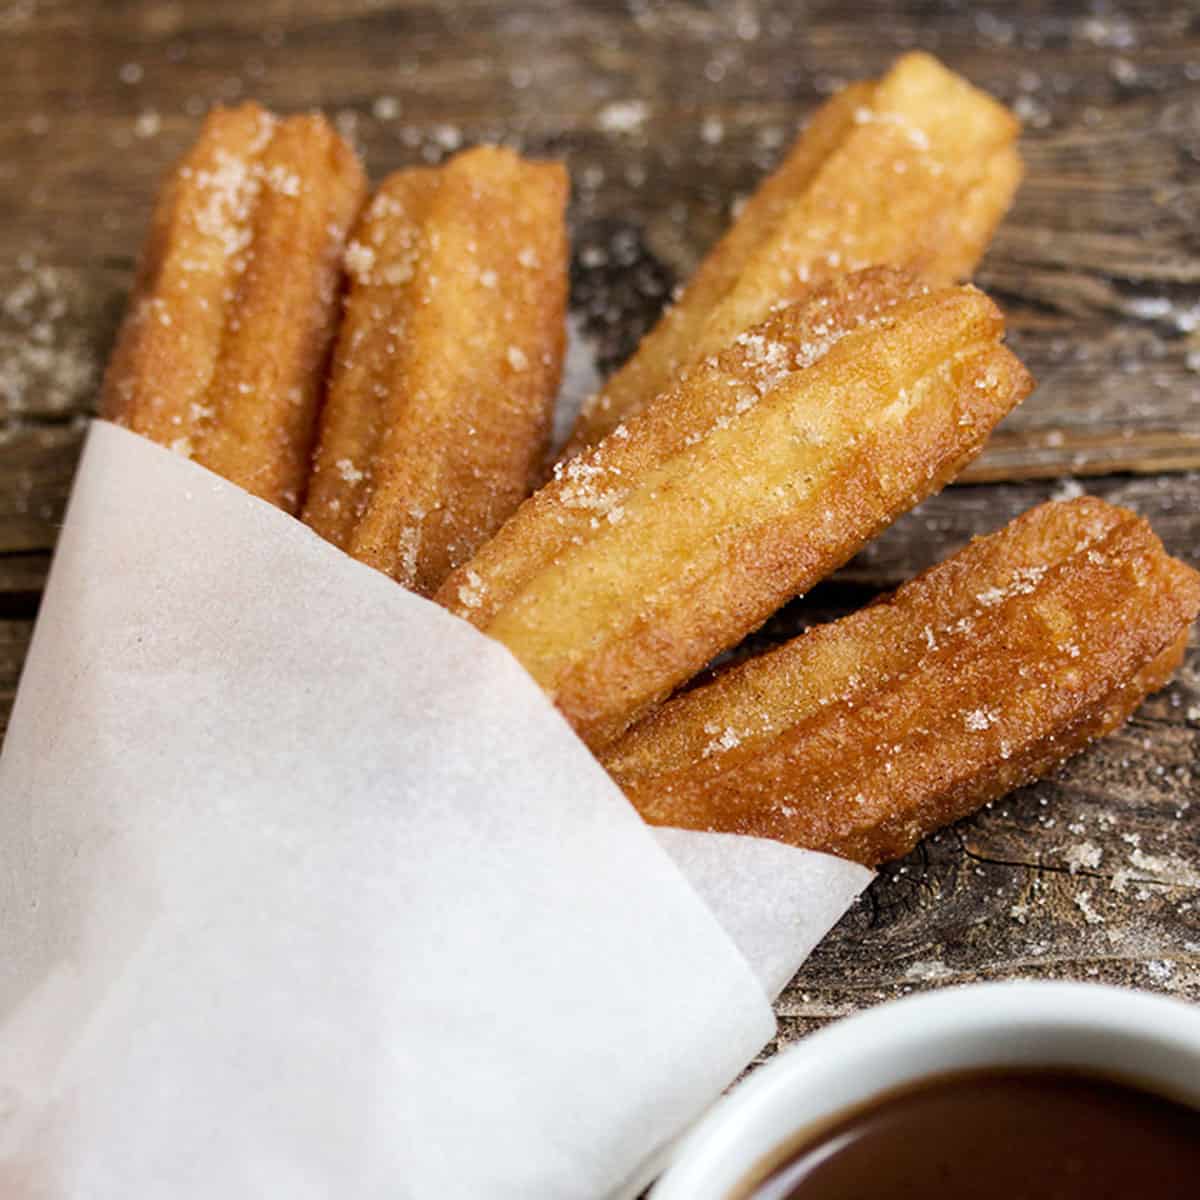 https://www.seasonsandsuppers.ca/wp-content/uploads/2015/06/churros-con-chocolate1200.jpg